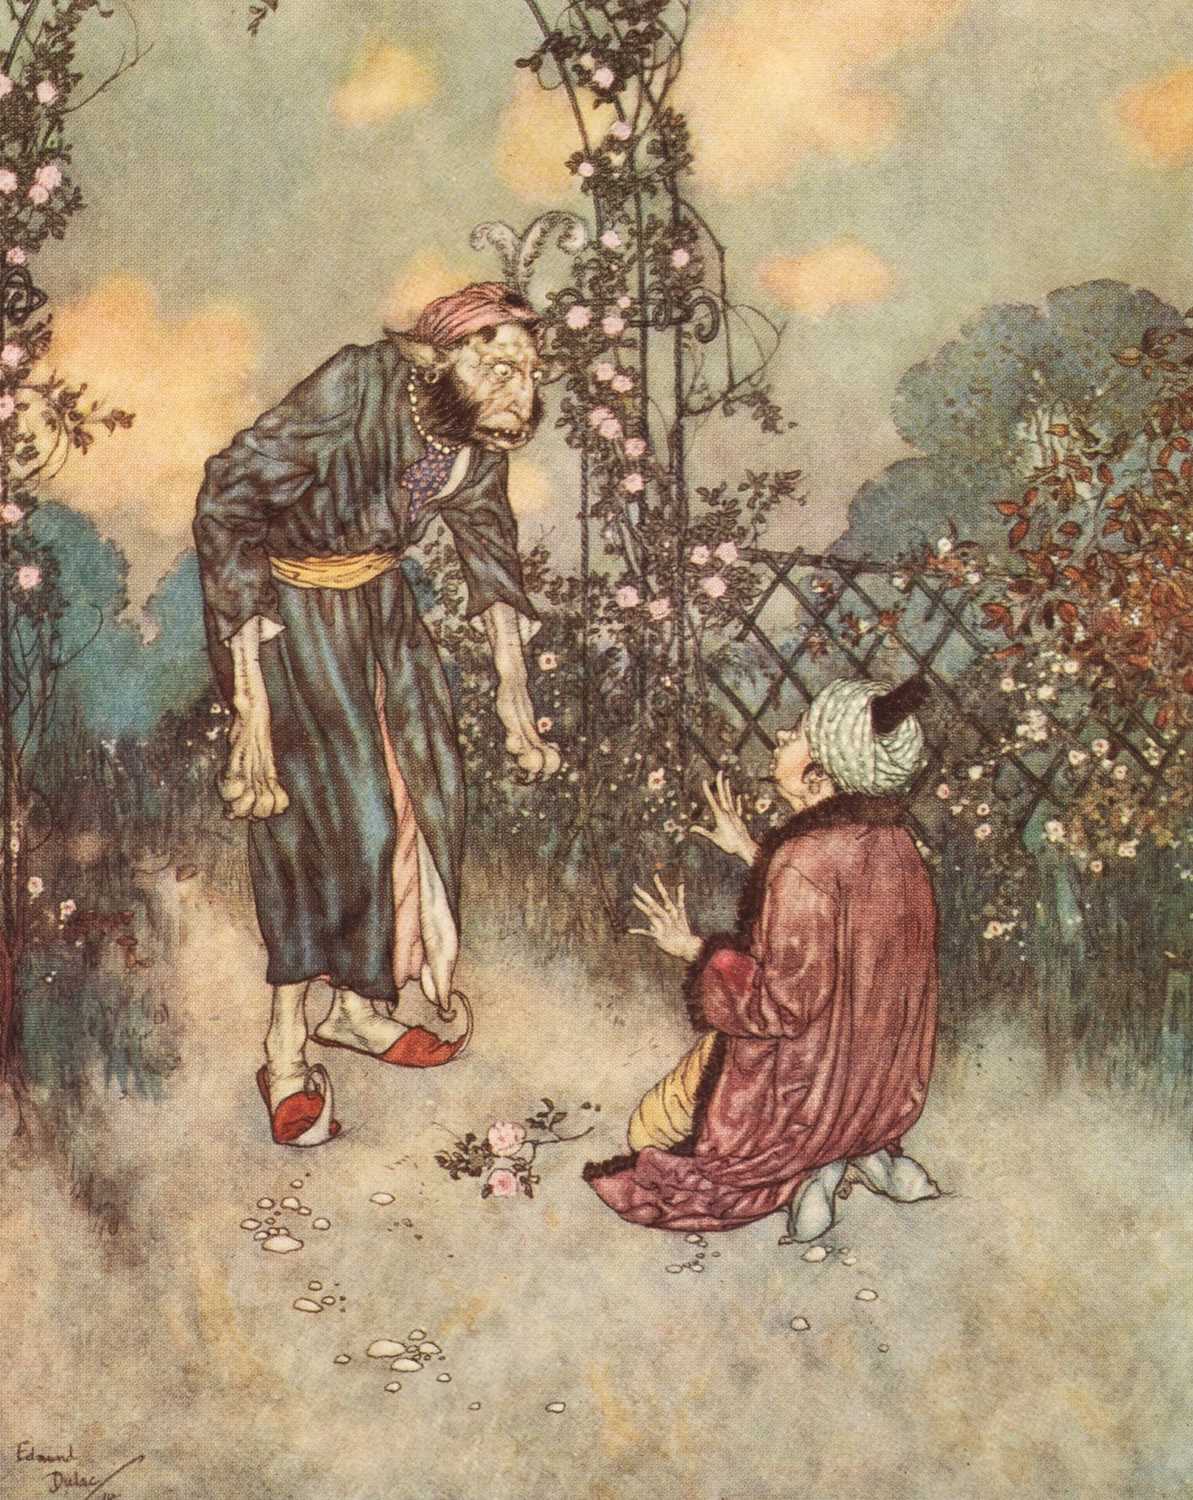 Quiller-Couch (Sir Arthur) The Sleeping Beauty and other fairy tales - Image 11 of 37